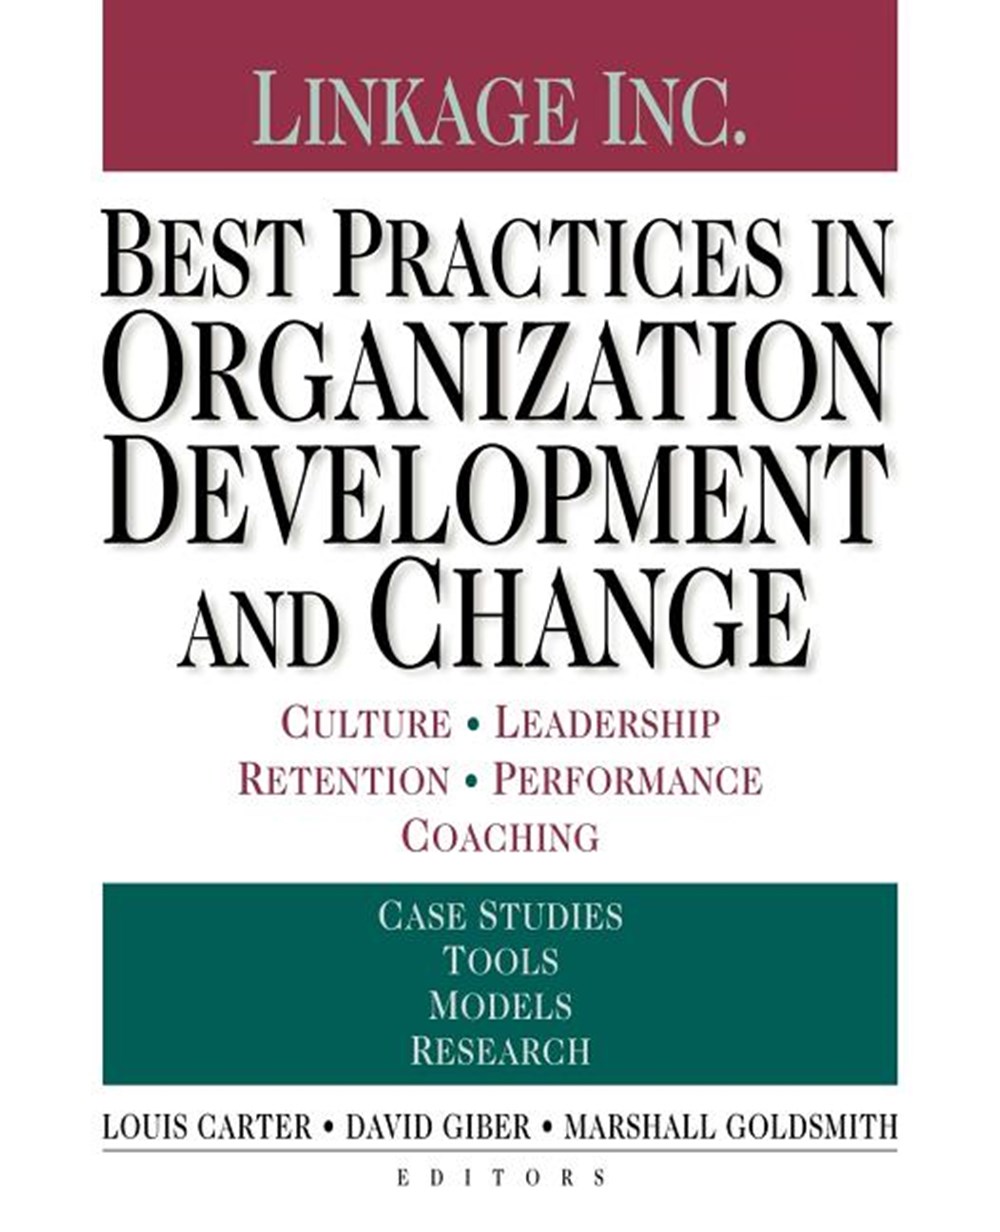 Best Practices in Organization Development and Change: Culture, Leadership, Retention, Performance, 